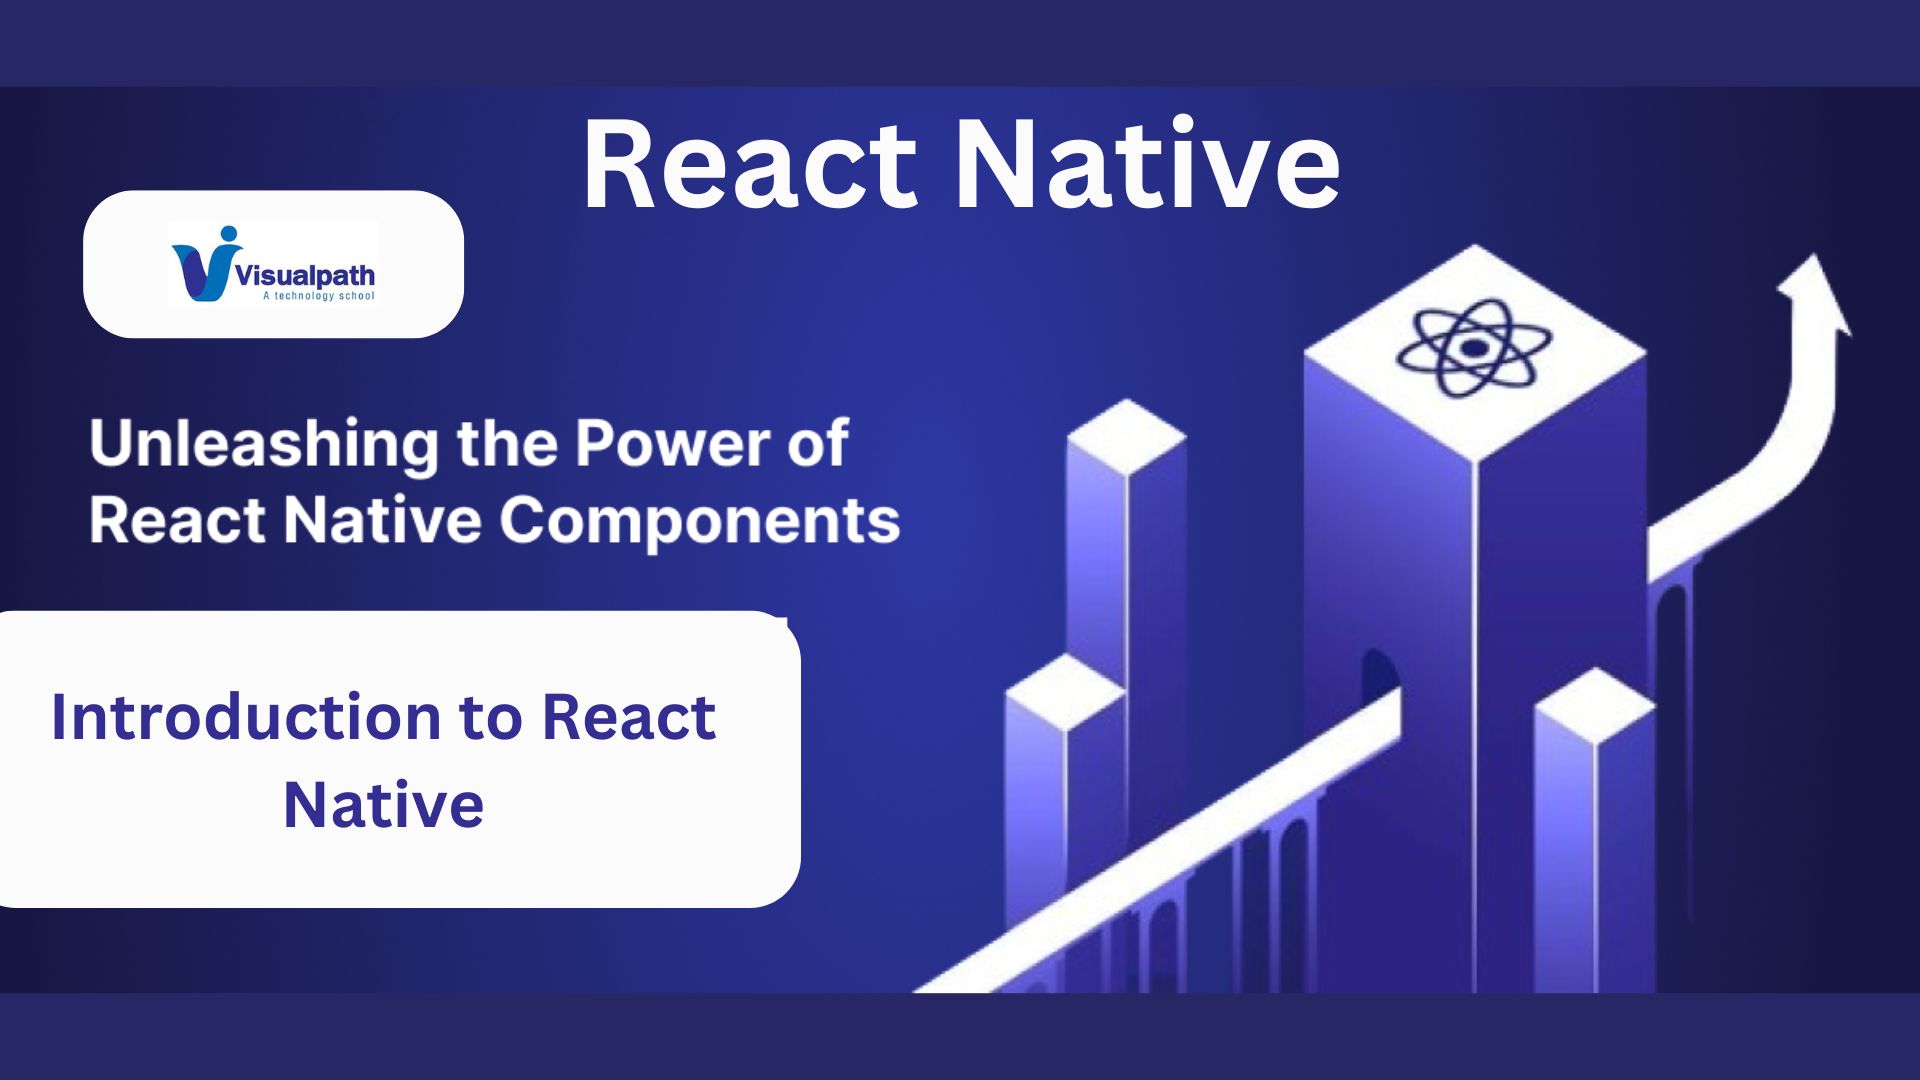 Introduction to React Native: A Dive into Basic Components